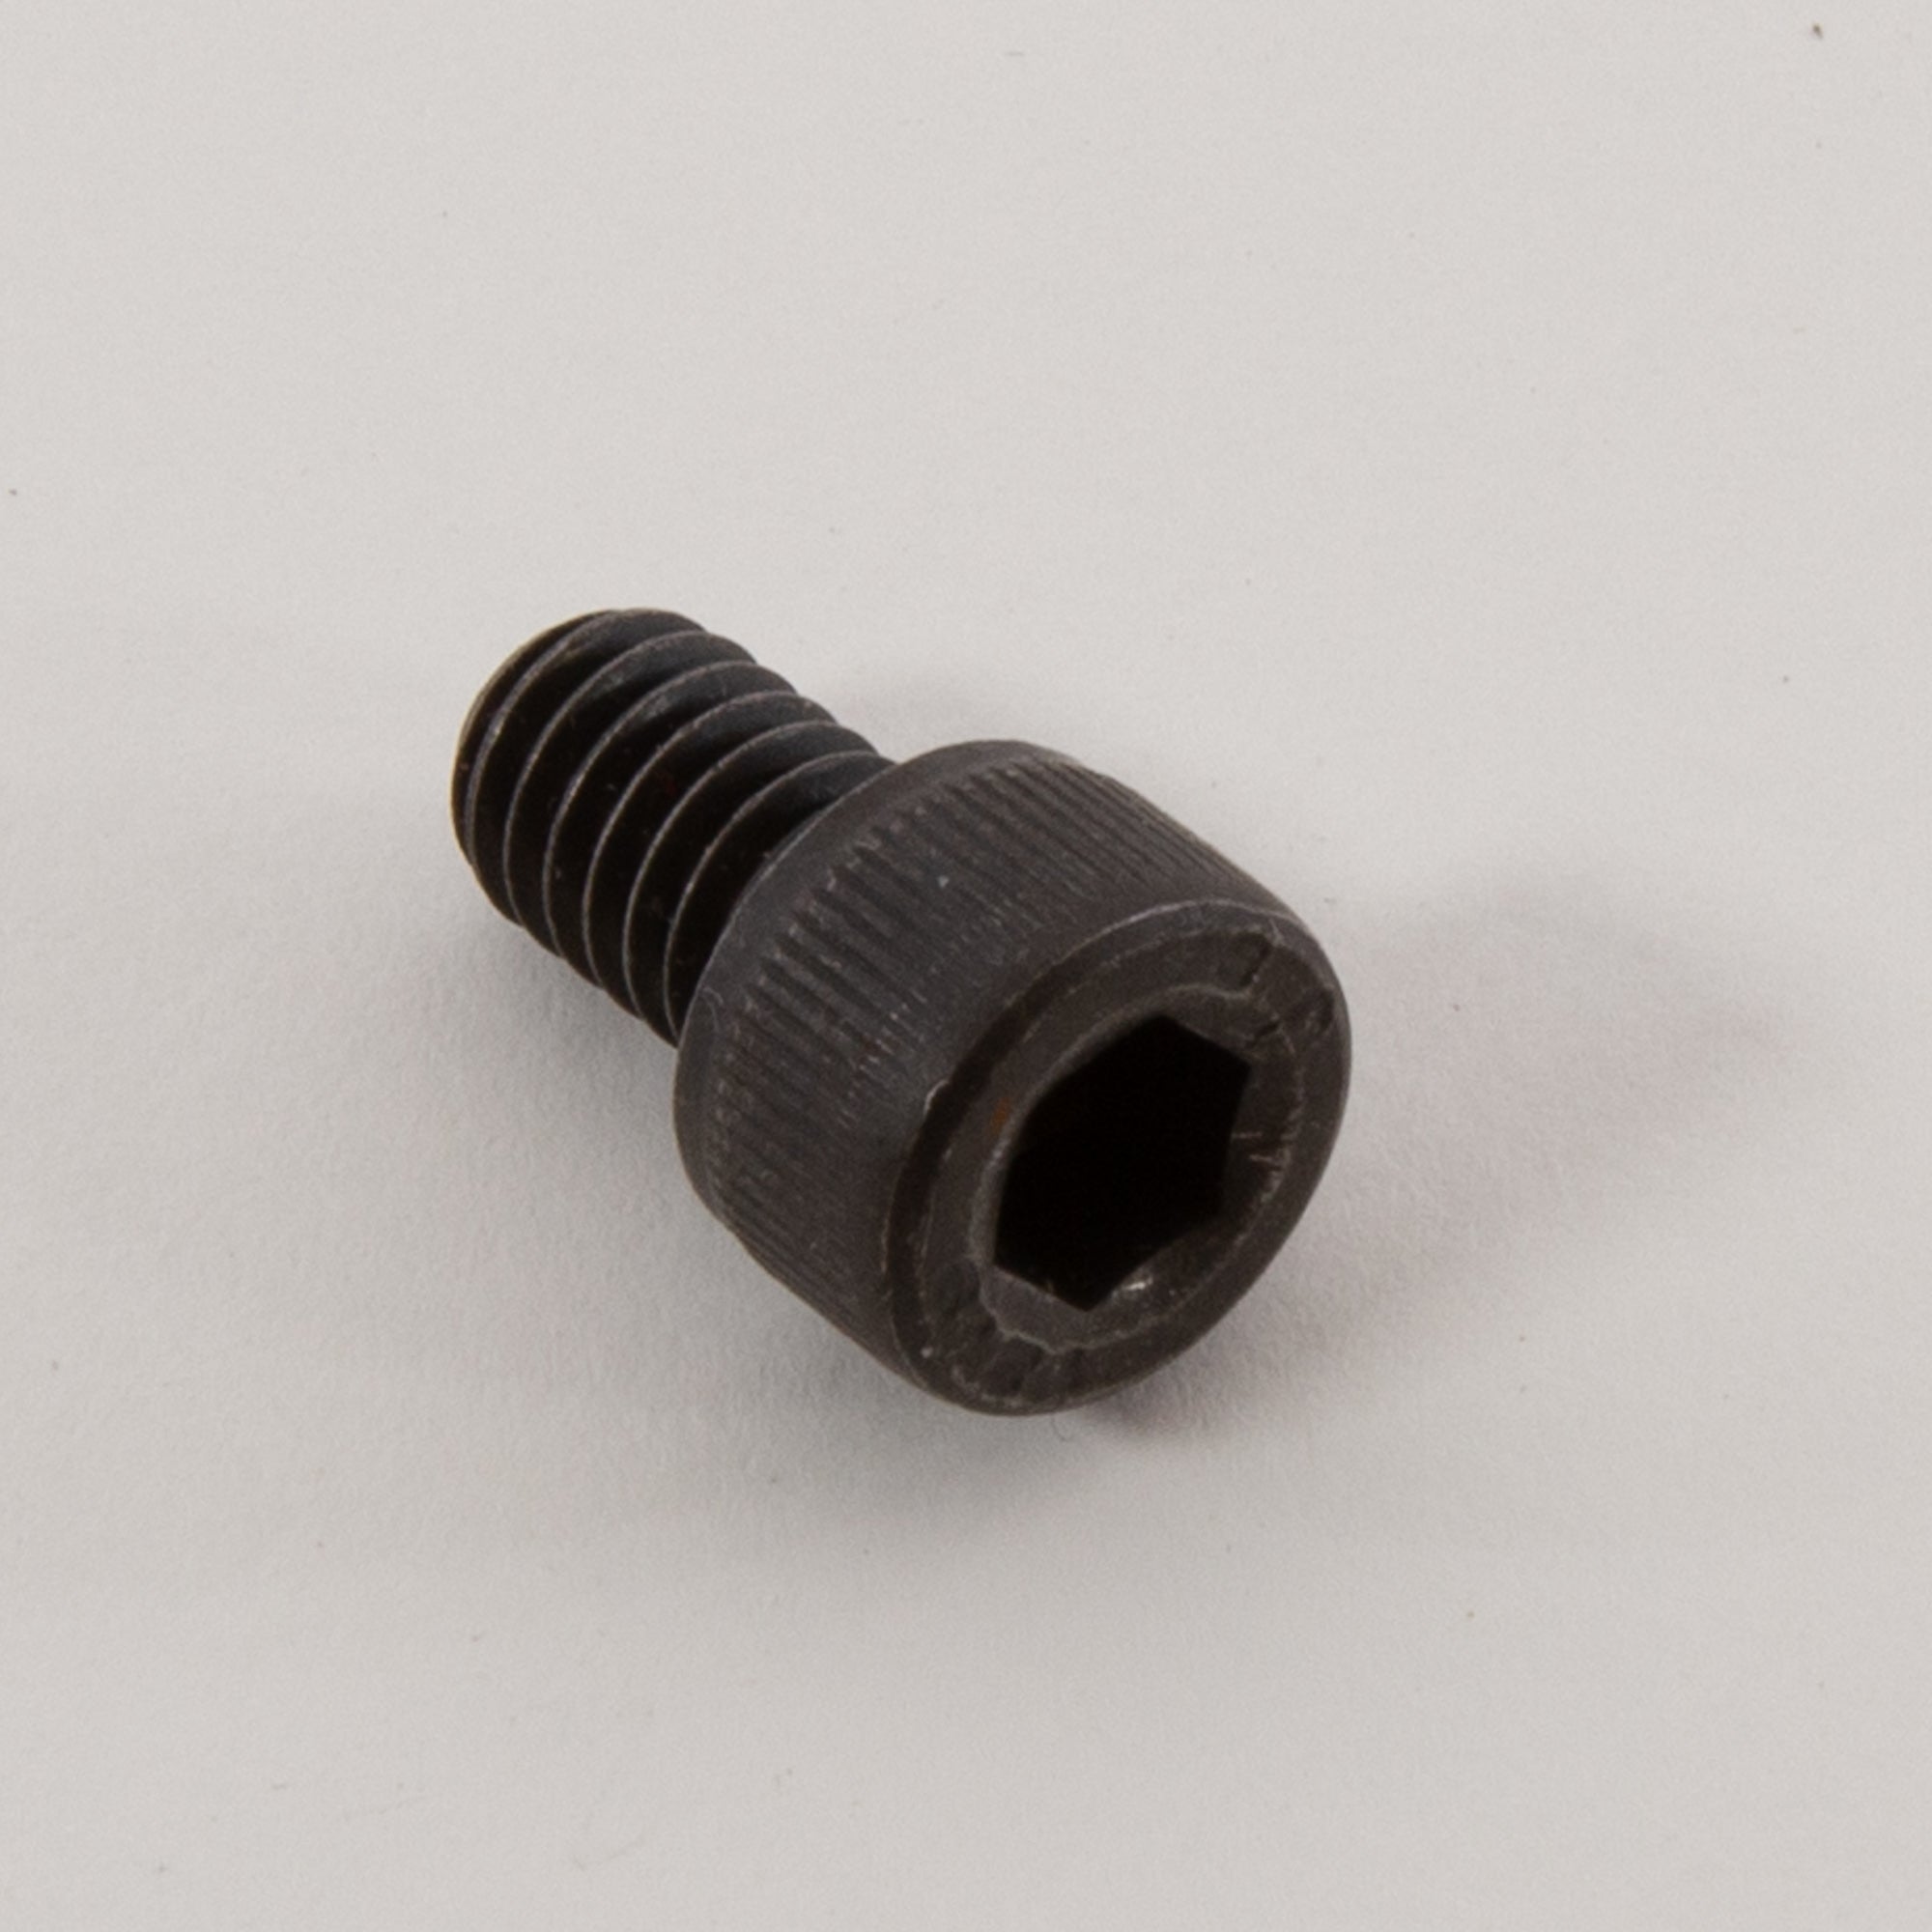 Replacement bolts for starting block end plates